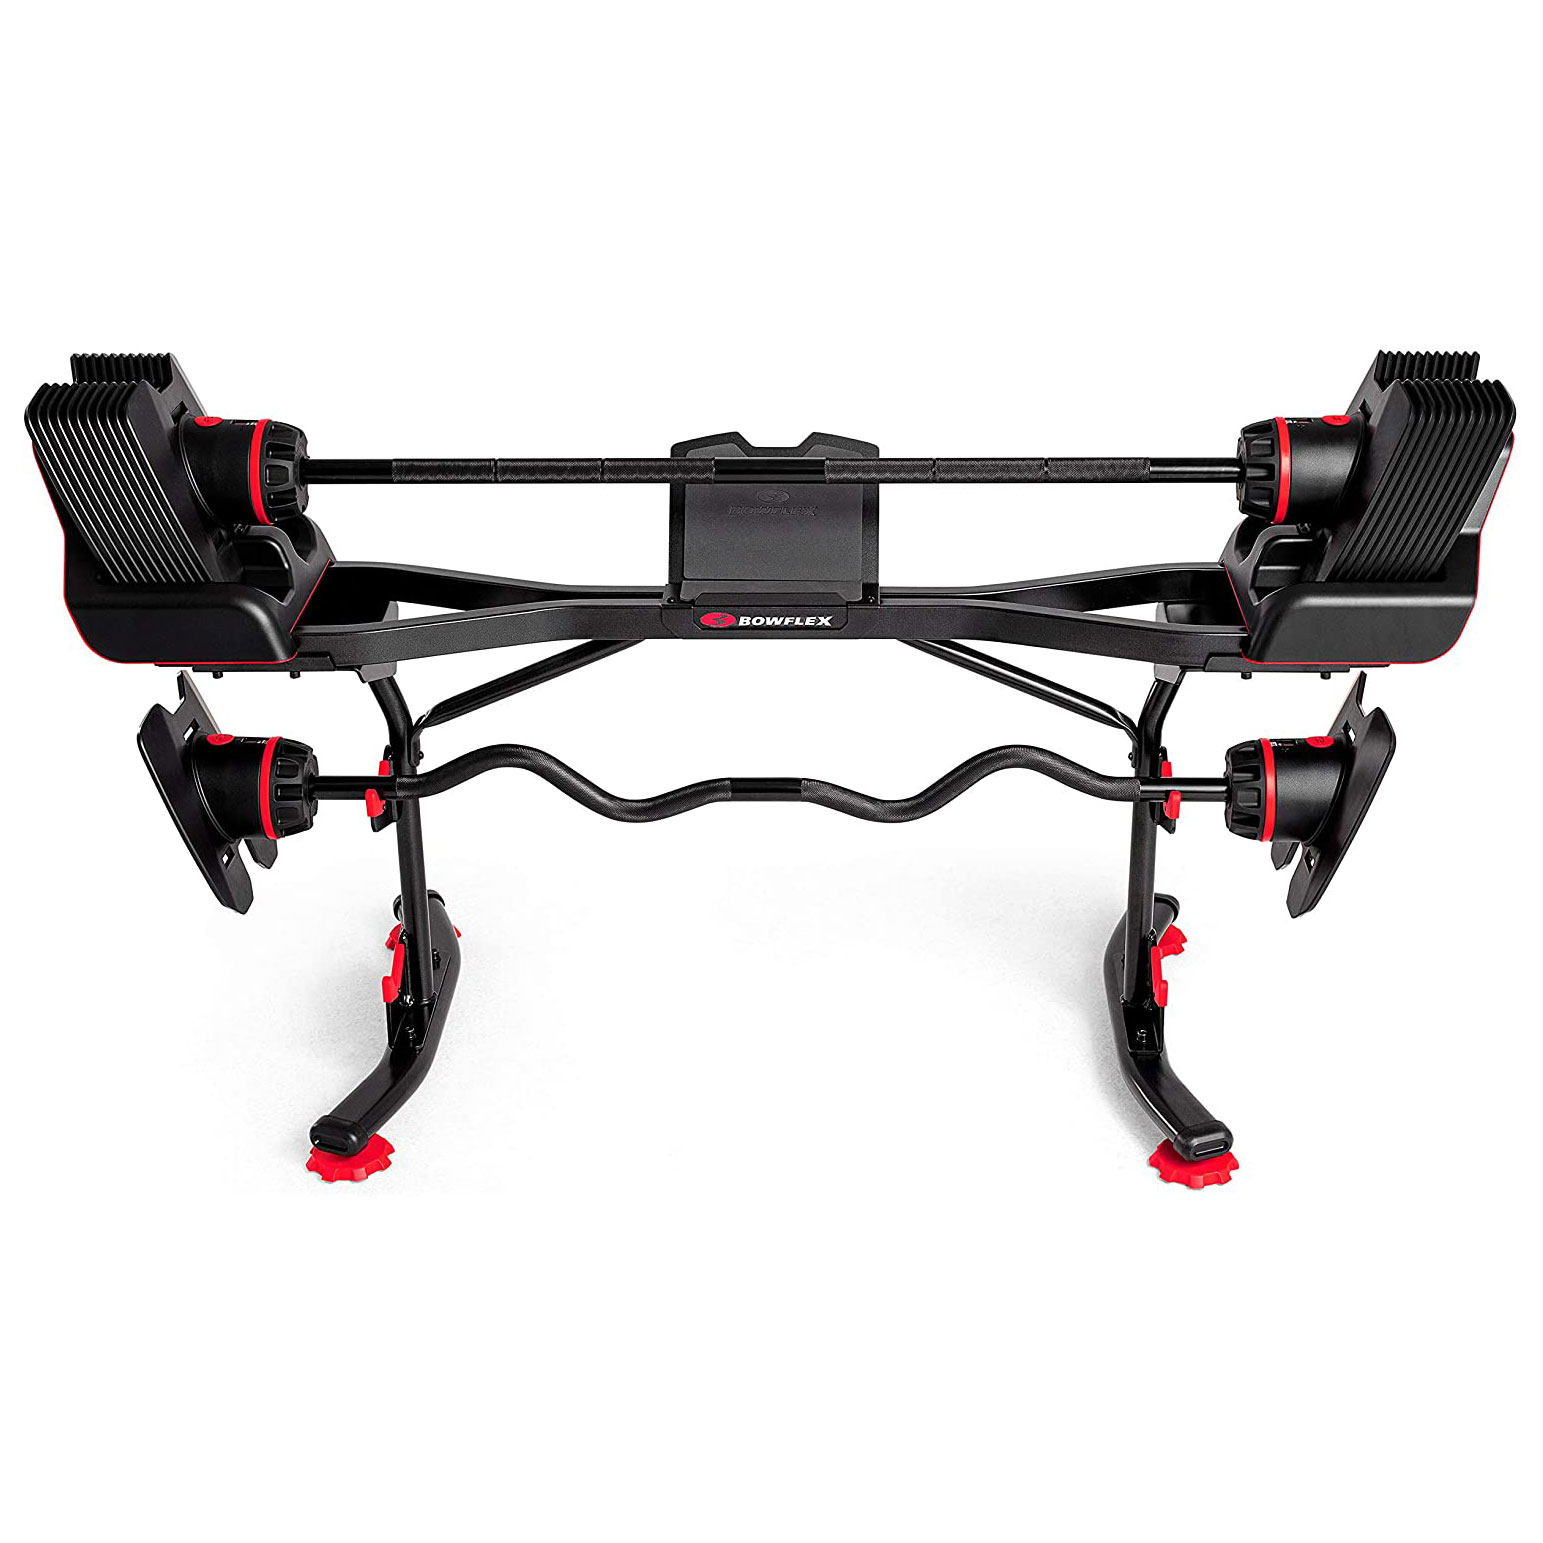 Bowflex SelectTech 2080 Stand with Media Rack for Barbell and Curl Bar - image 5 of 5